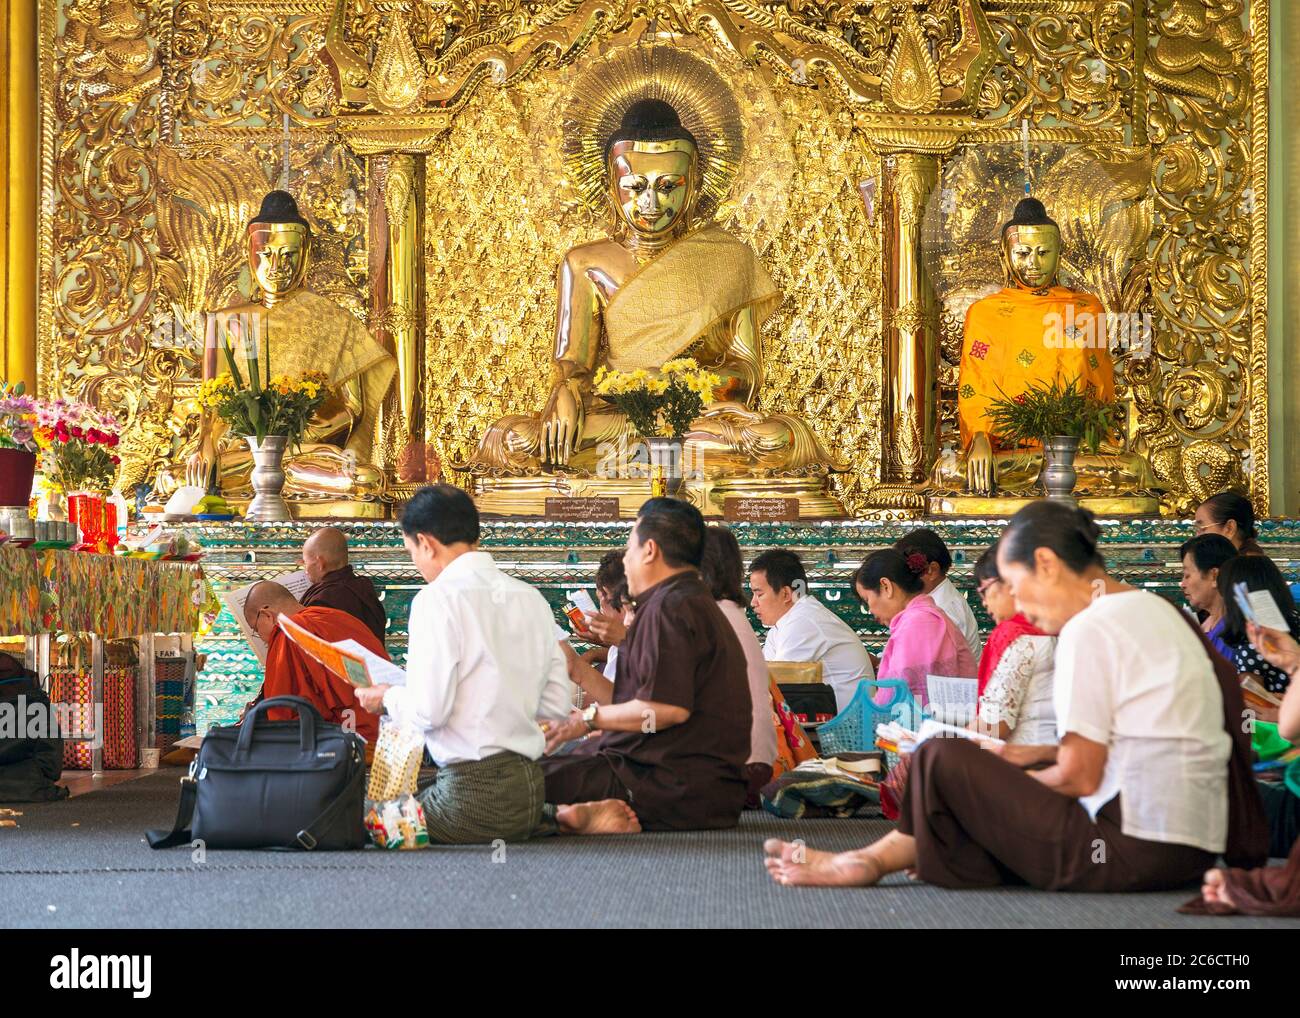 Worshippers praying in front of gilded Buddha statues at the Shwedagon Pagoda in Yangon, Myanmar Stock Photo